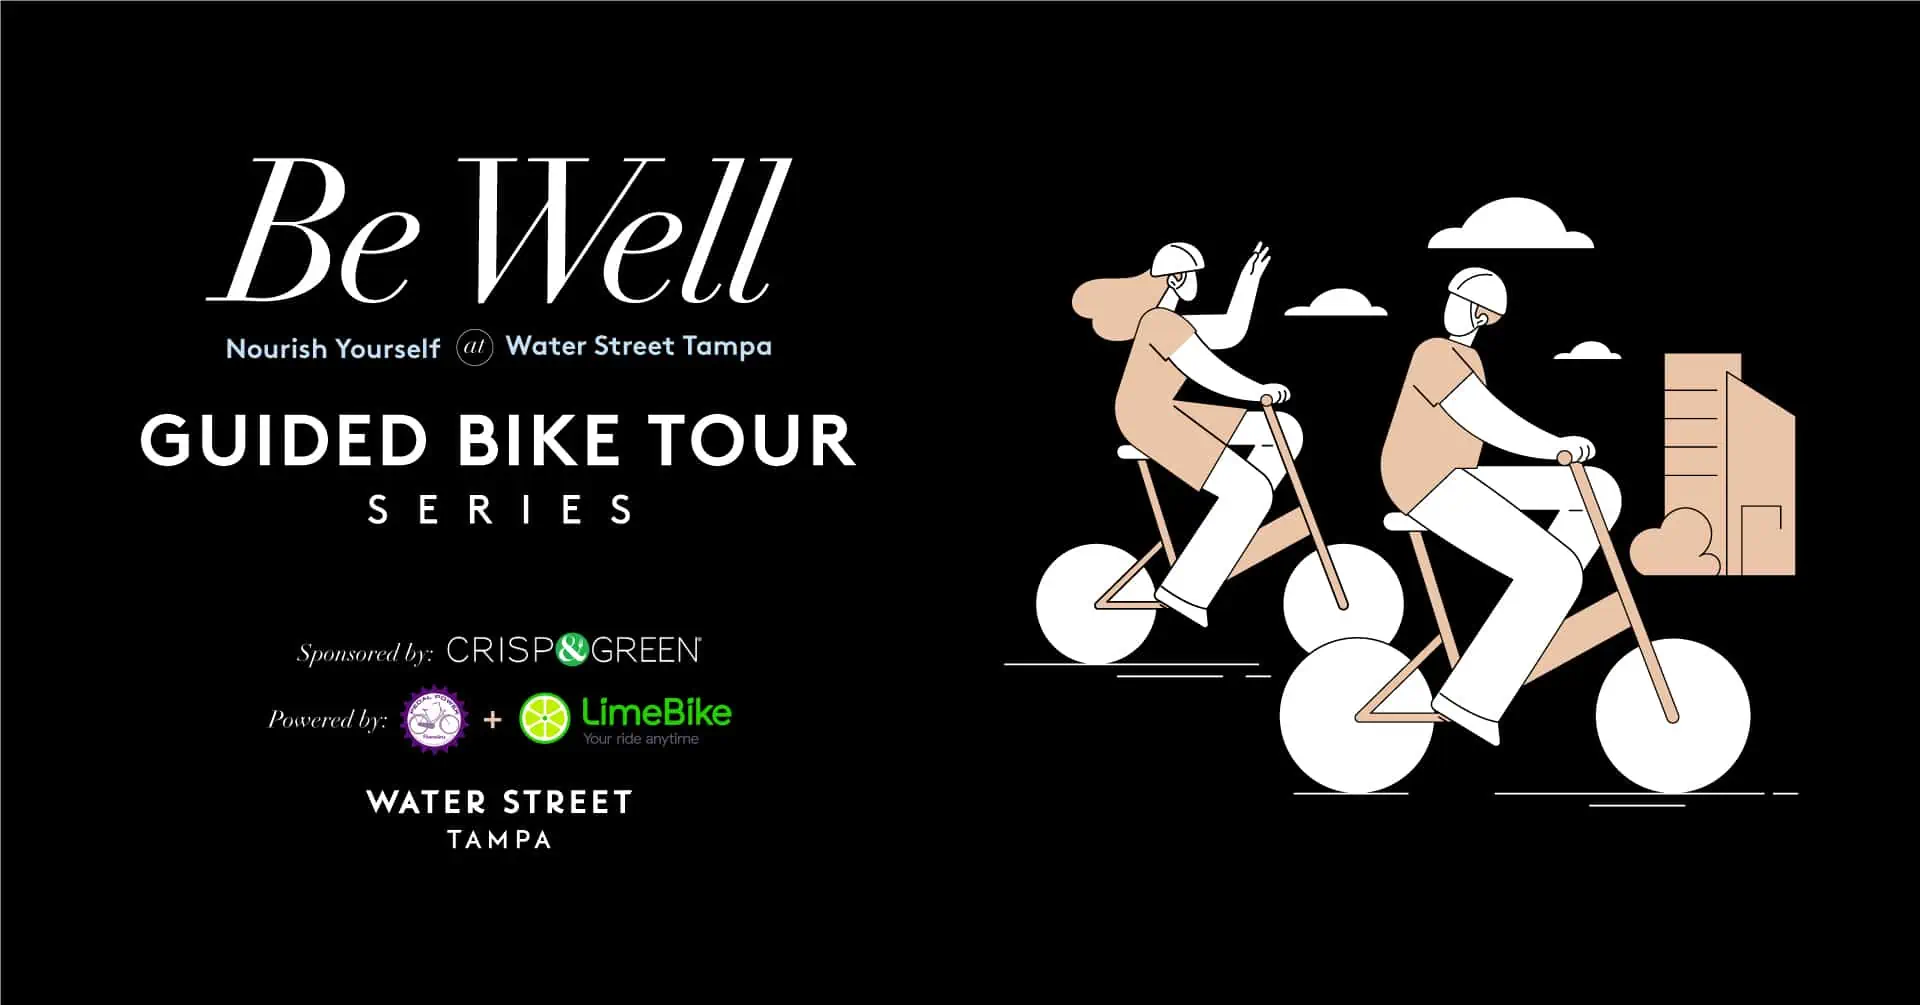 Be Well | Guided Bike Tour at Water Street Tampa